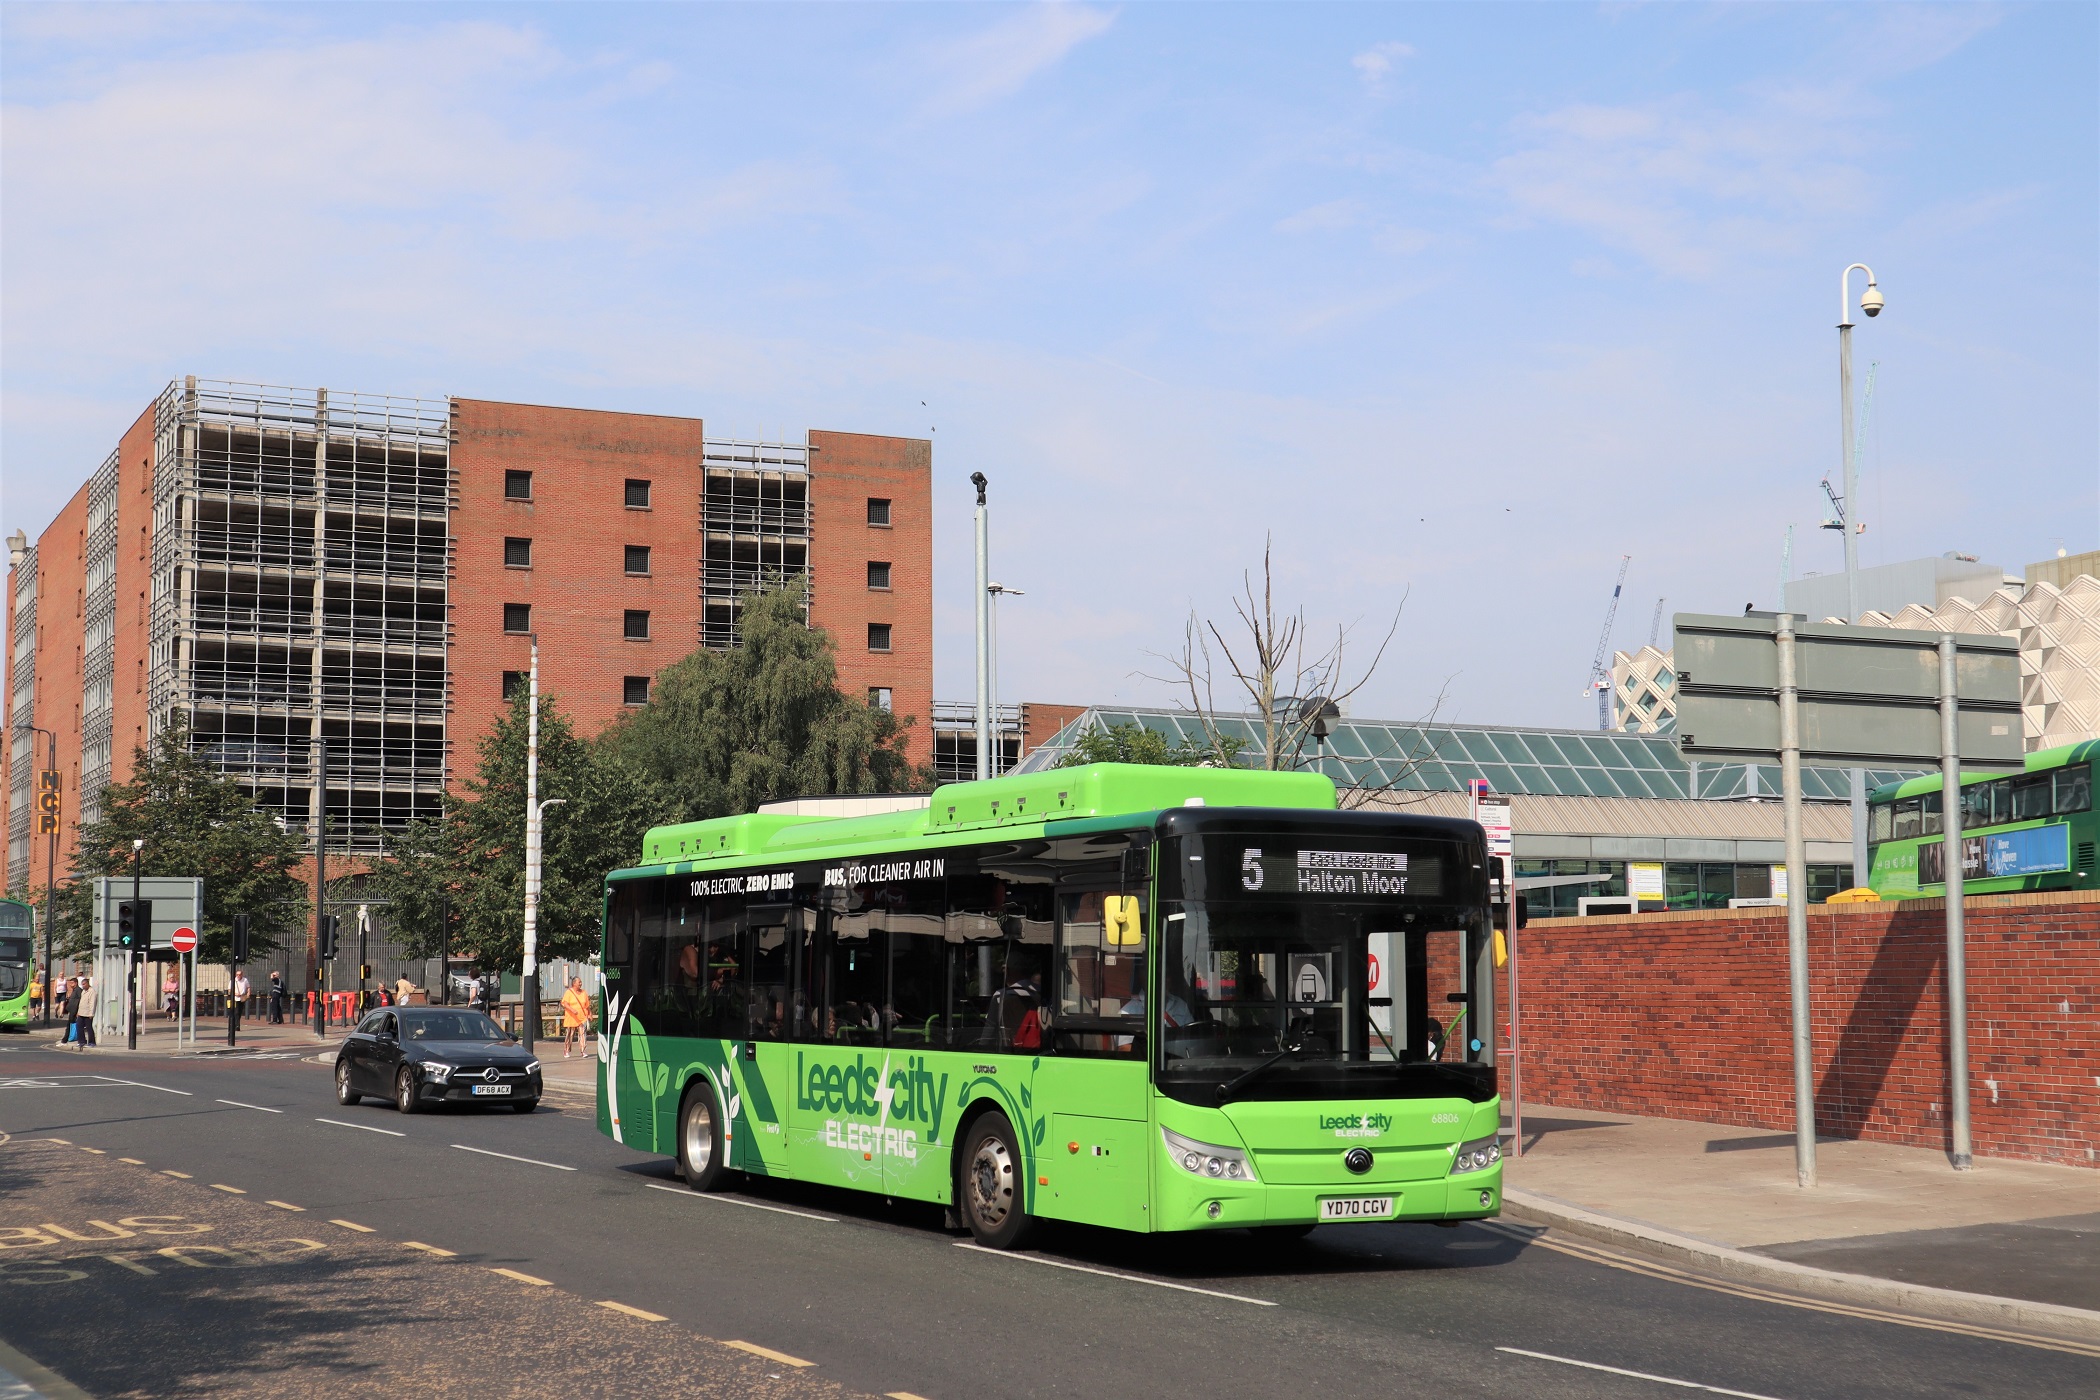 Customer centricity explored by First Bus